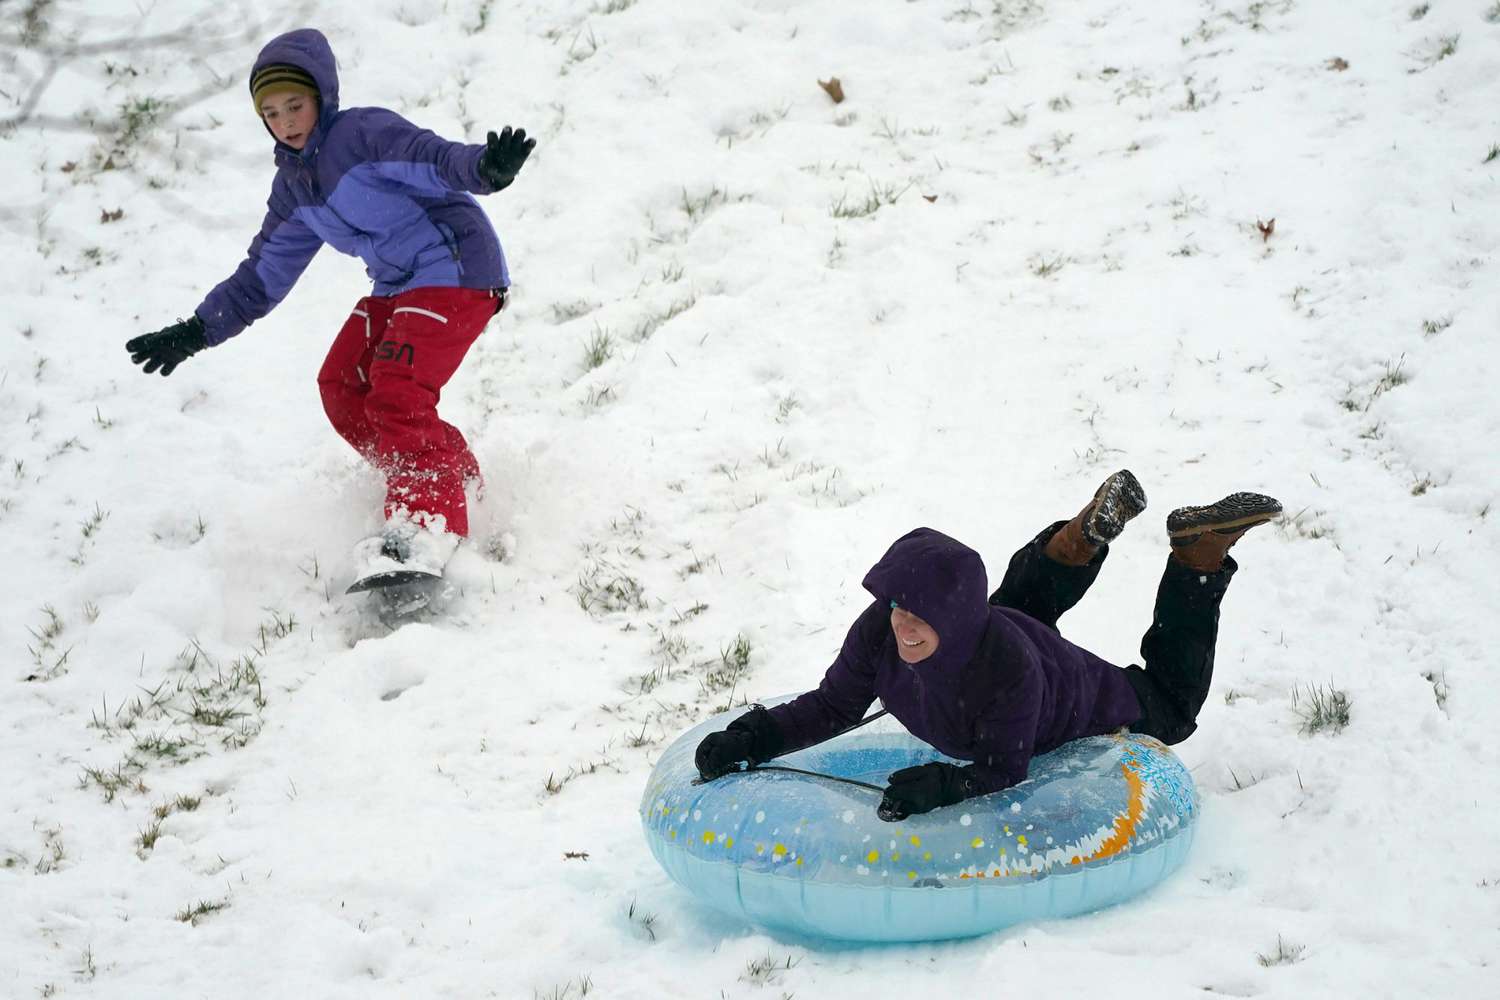 Krystal Krause, right, rides a tube and Lilyann Richard, 11, snowboards down a hill during a snowstorm, in Lutherville-Timonium, Md